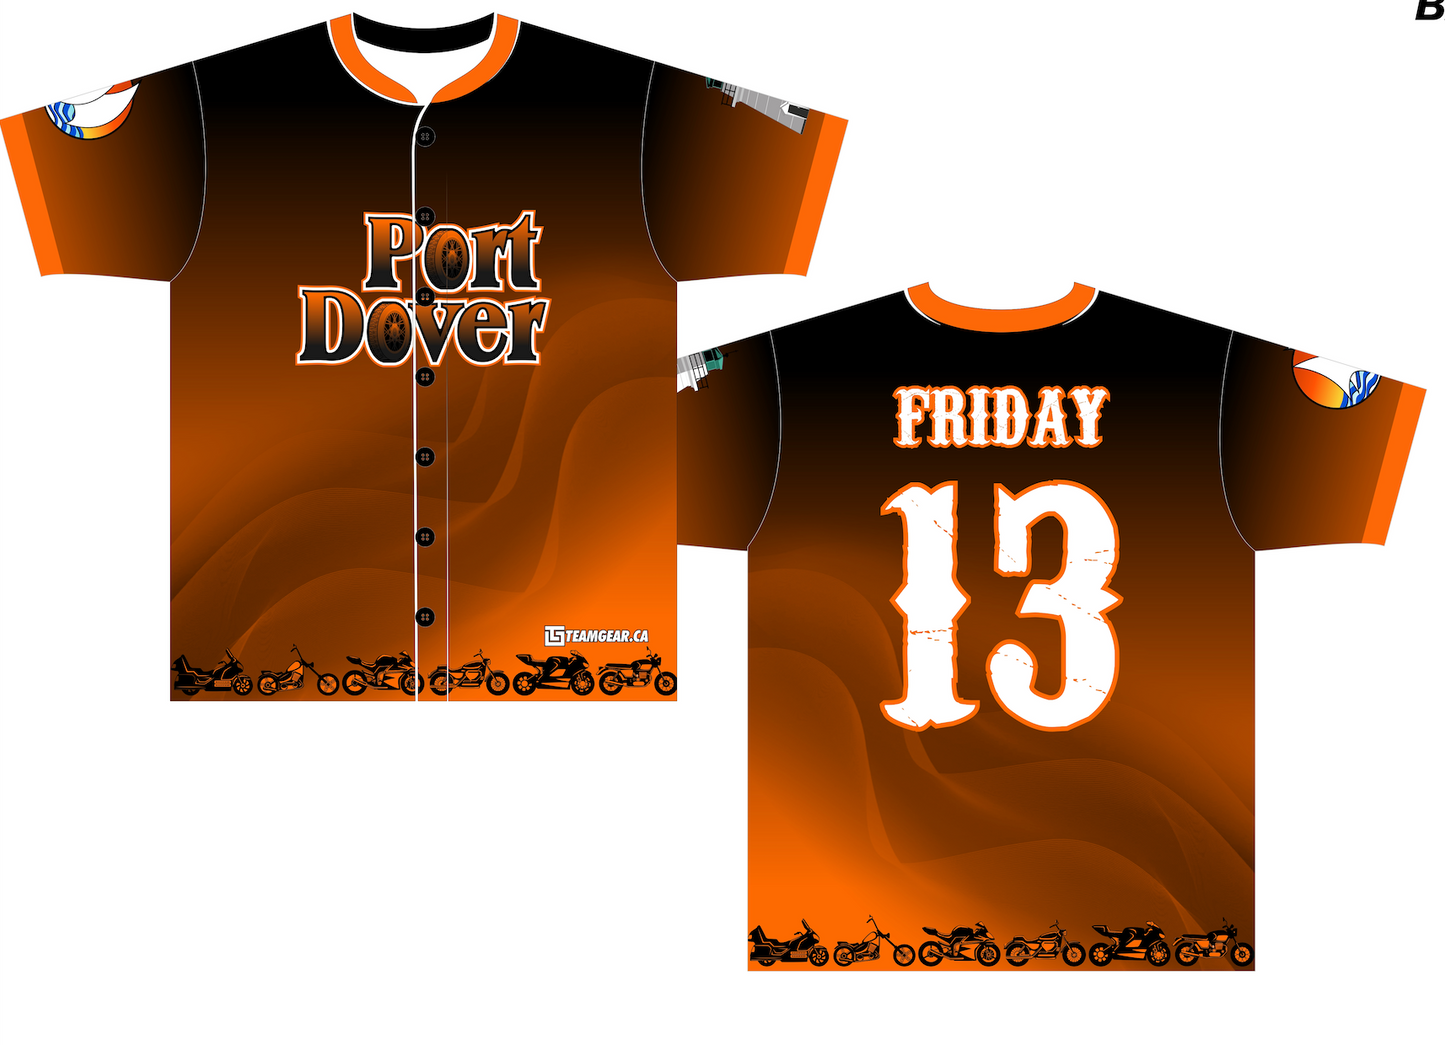 city of Port Dover Friday the 13th themed jersey with Lake Erie lighthouse and the old Callahan's Beach House logo. Custom designed, limited edition City Link jerseys available at teamgear.ca